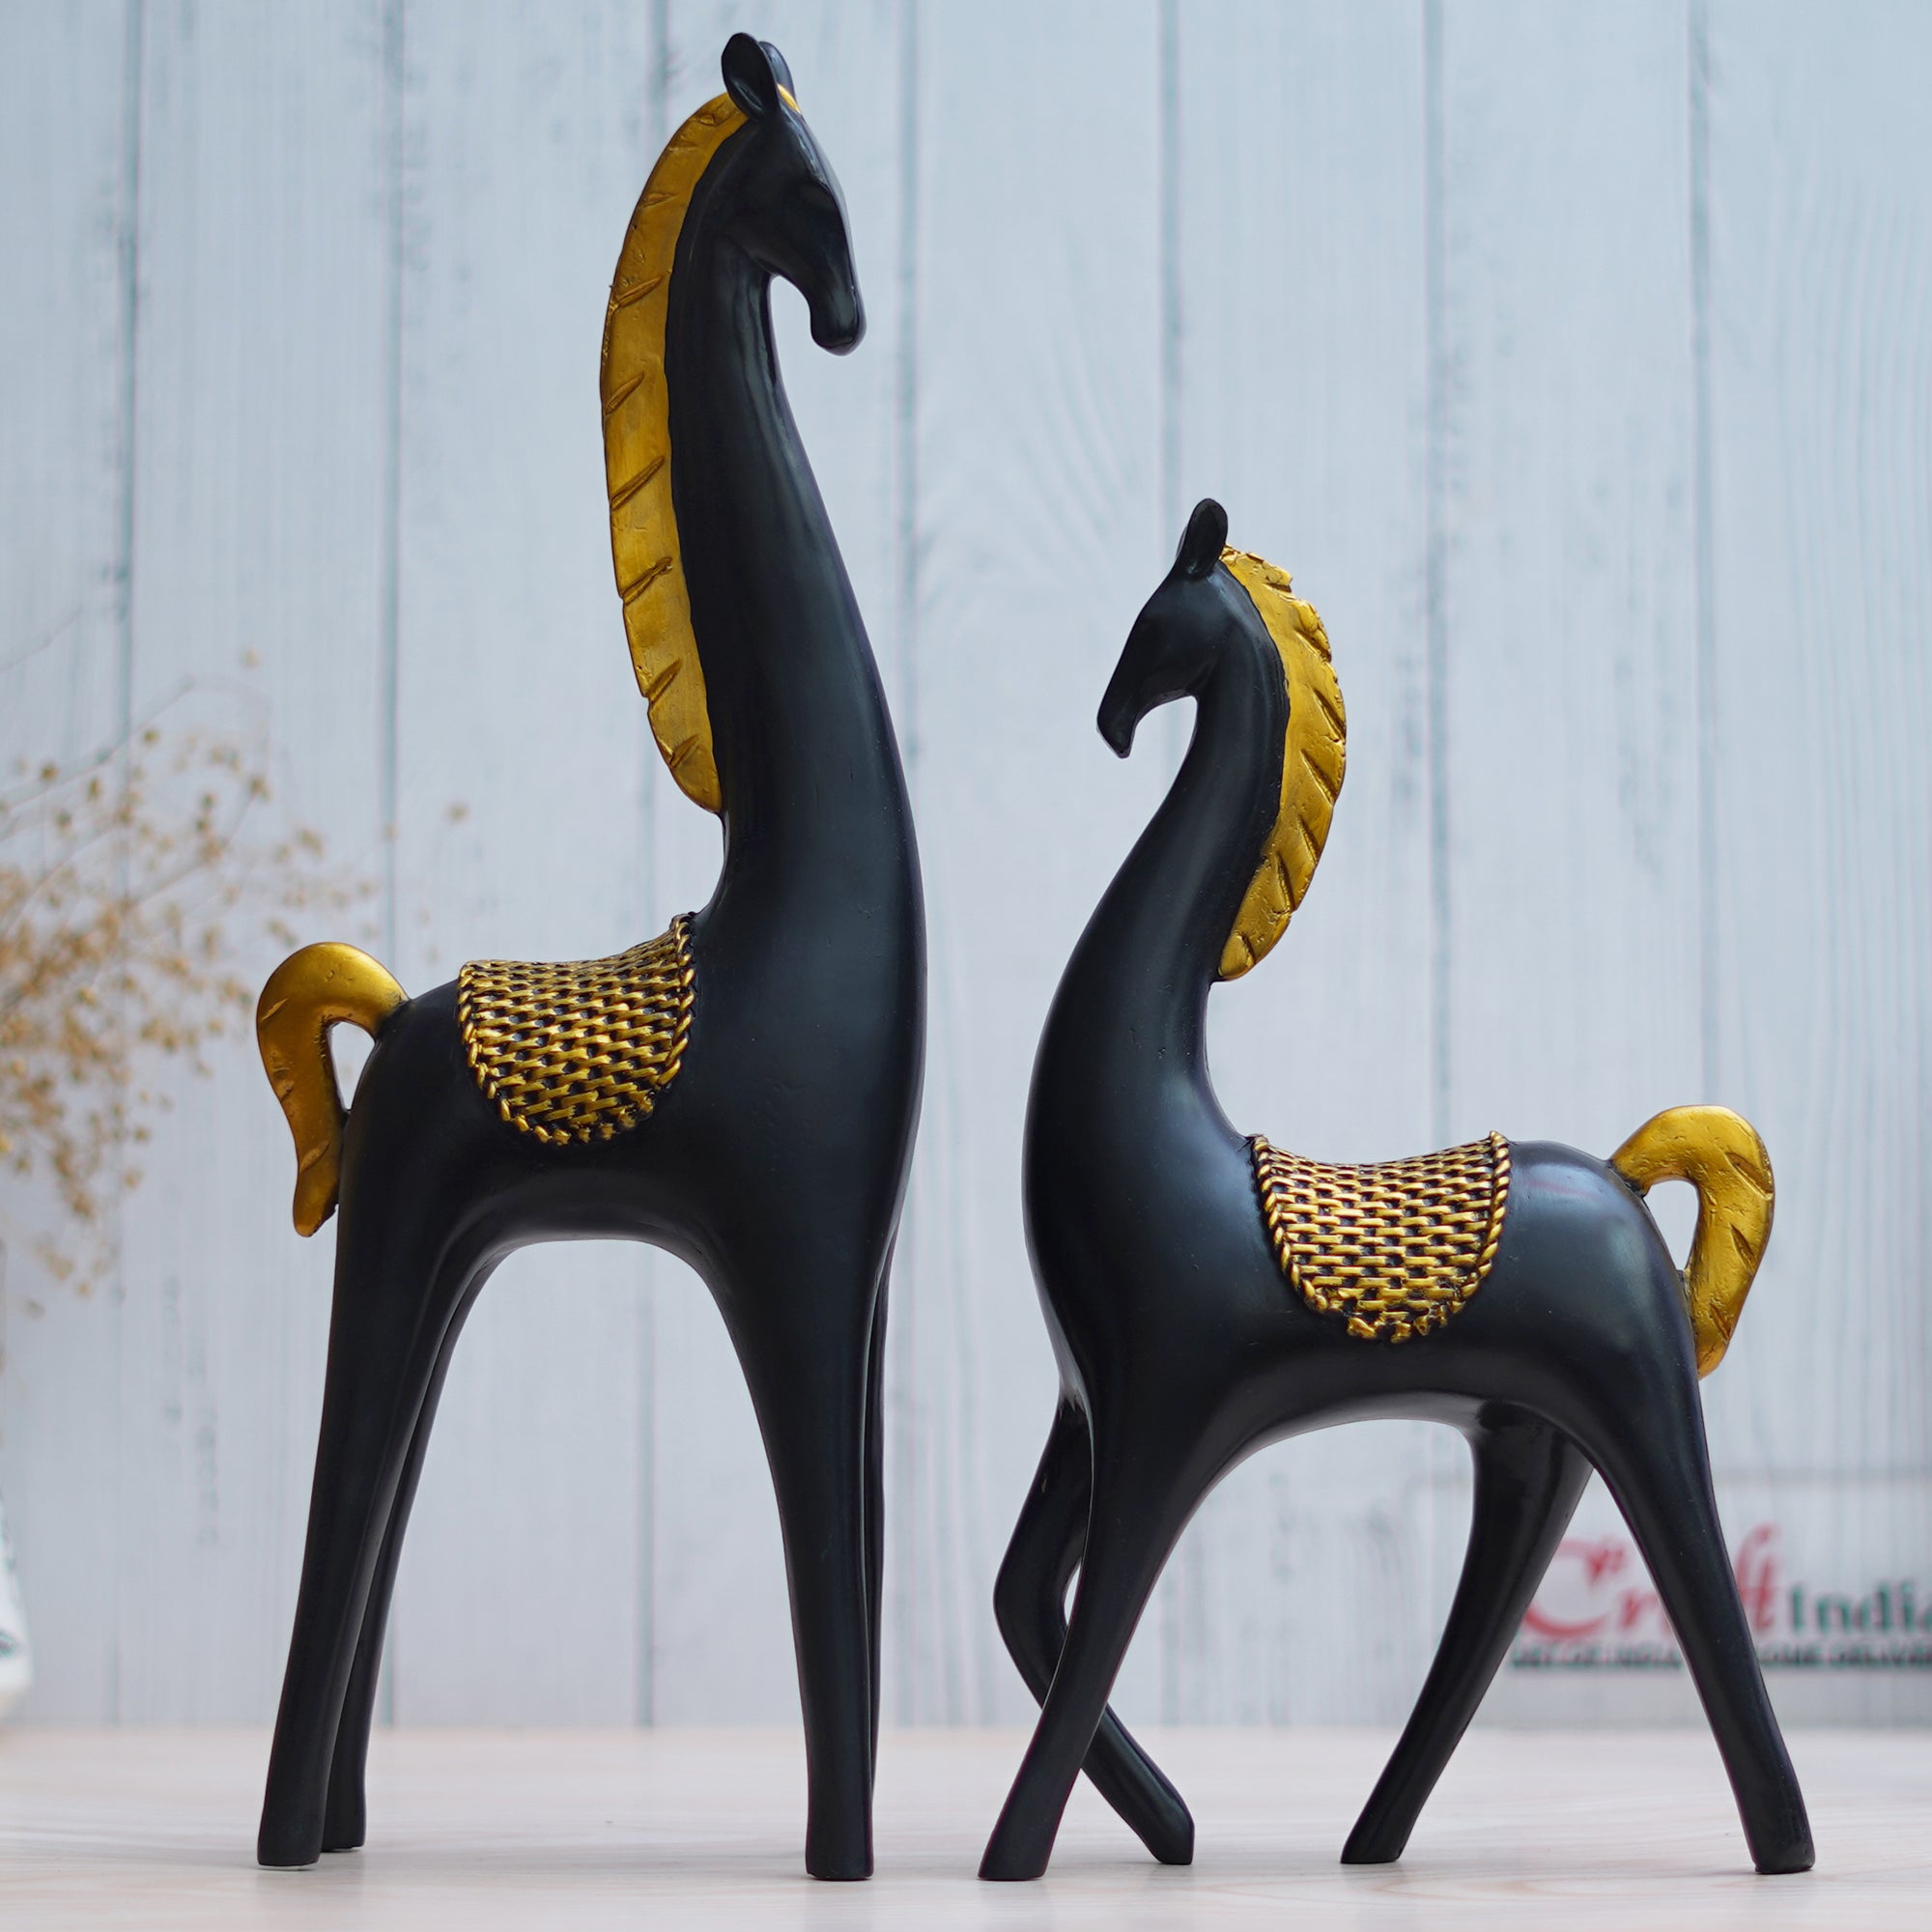 Set of 2 Black Horse Statues with Golden Hair Decorative Animal Figurines 1